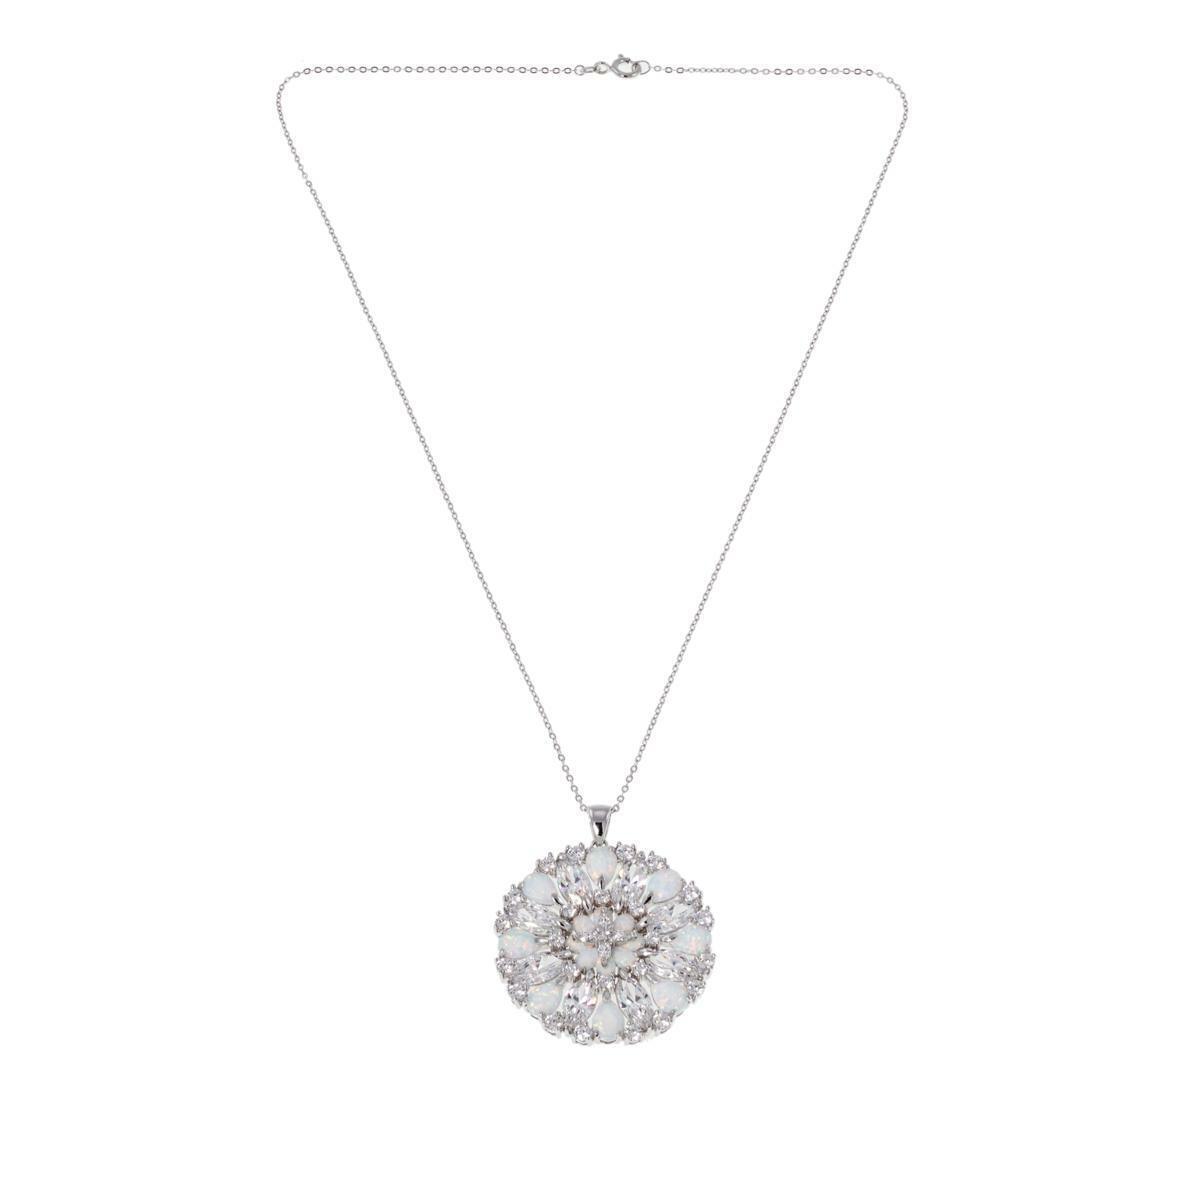 Absolute Sterling Opal & Cubic Zirconia Round Cluster Pendant Necklace HSN $190.